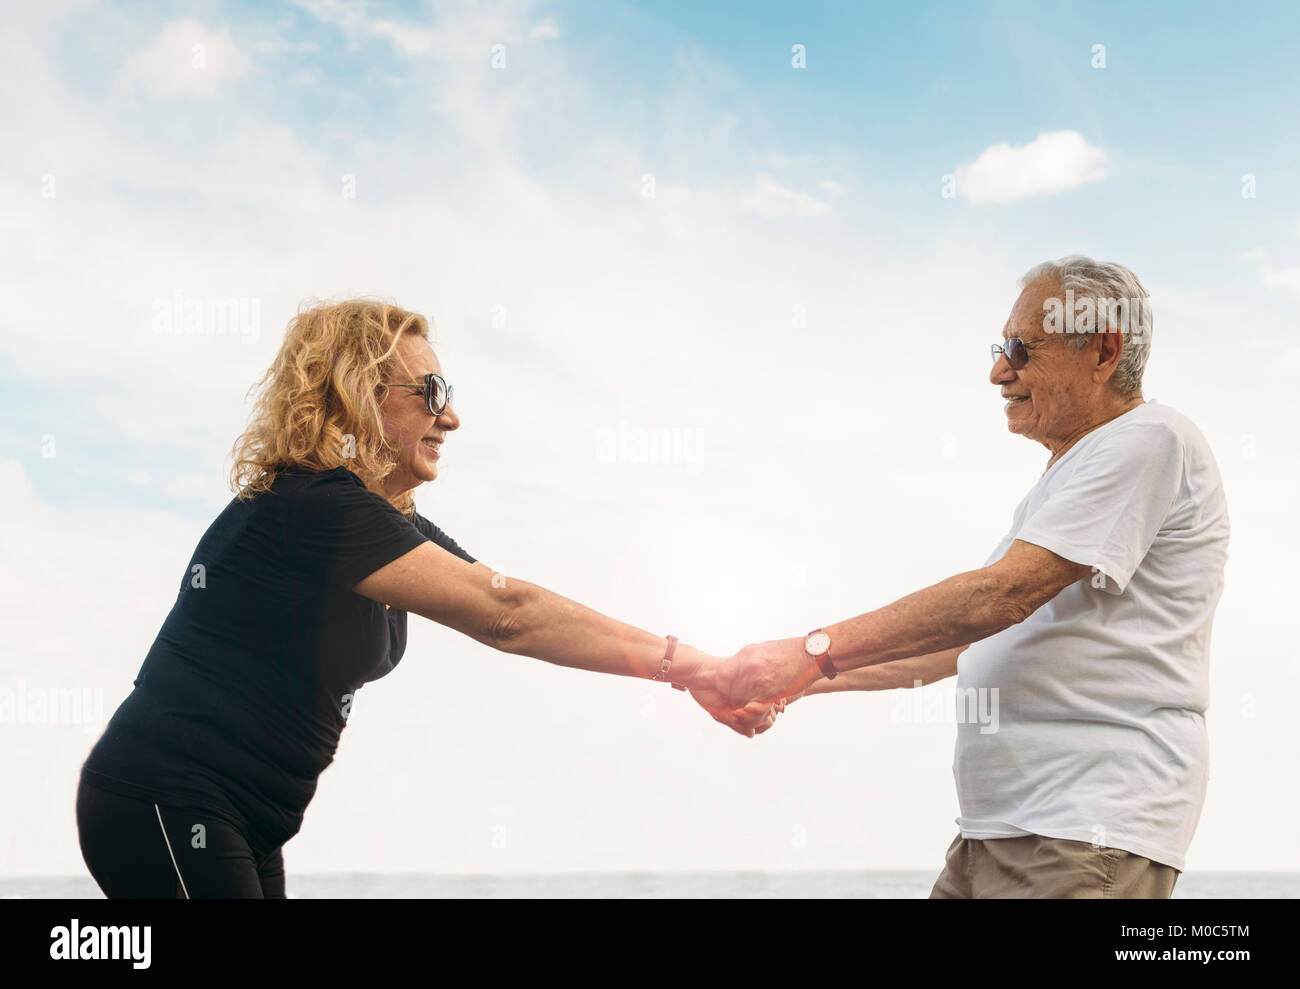 Model Released:  Mature heterosexual couple stretching together against blue sky outdoors Stock Photo